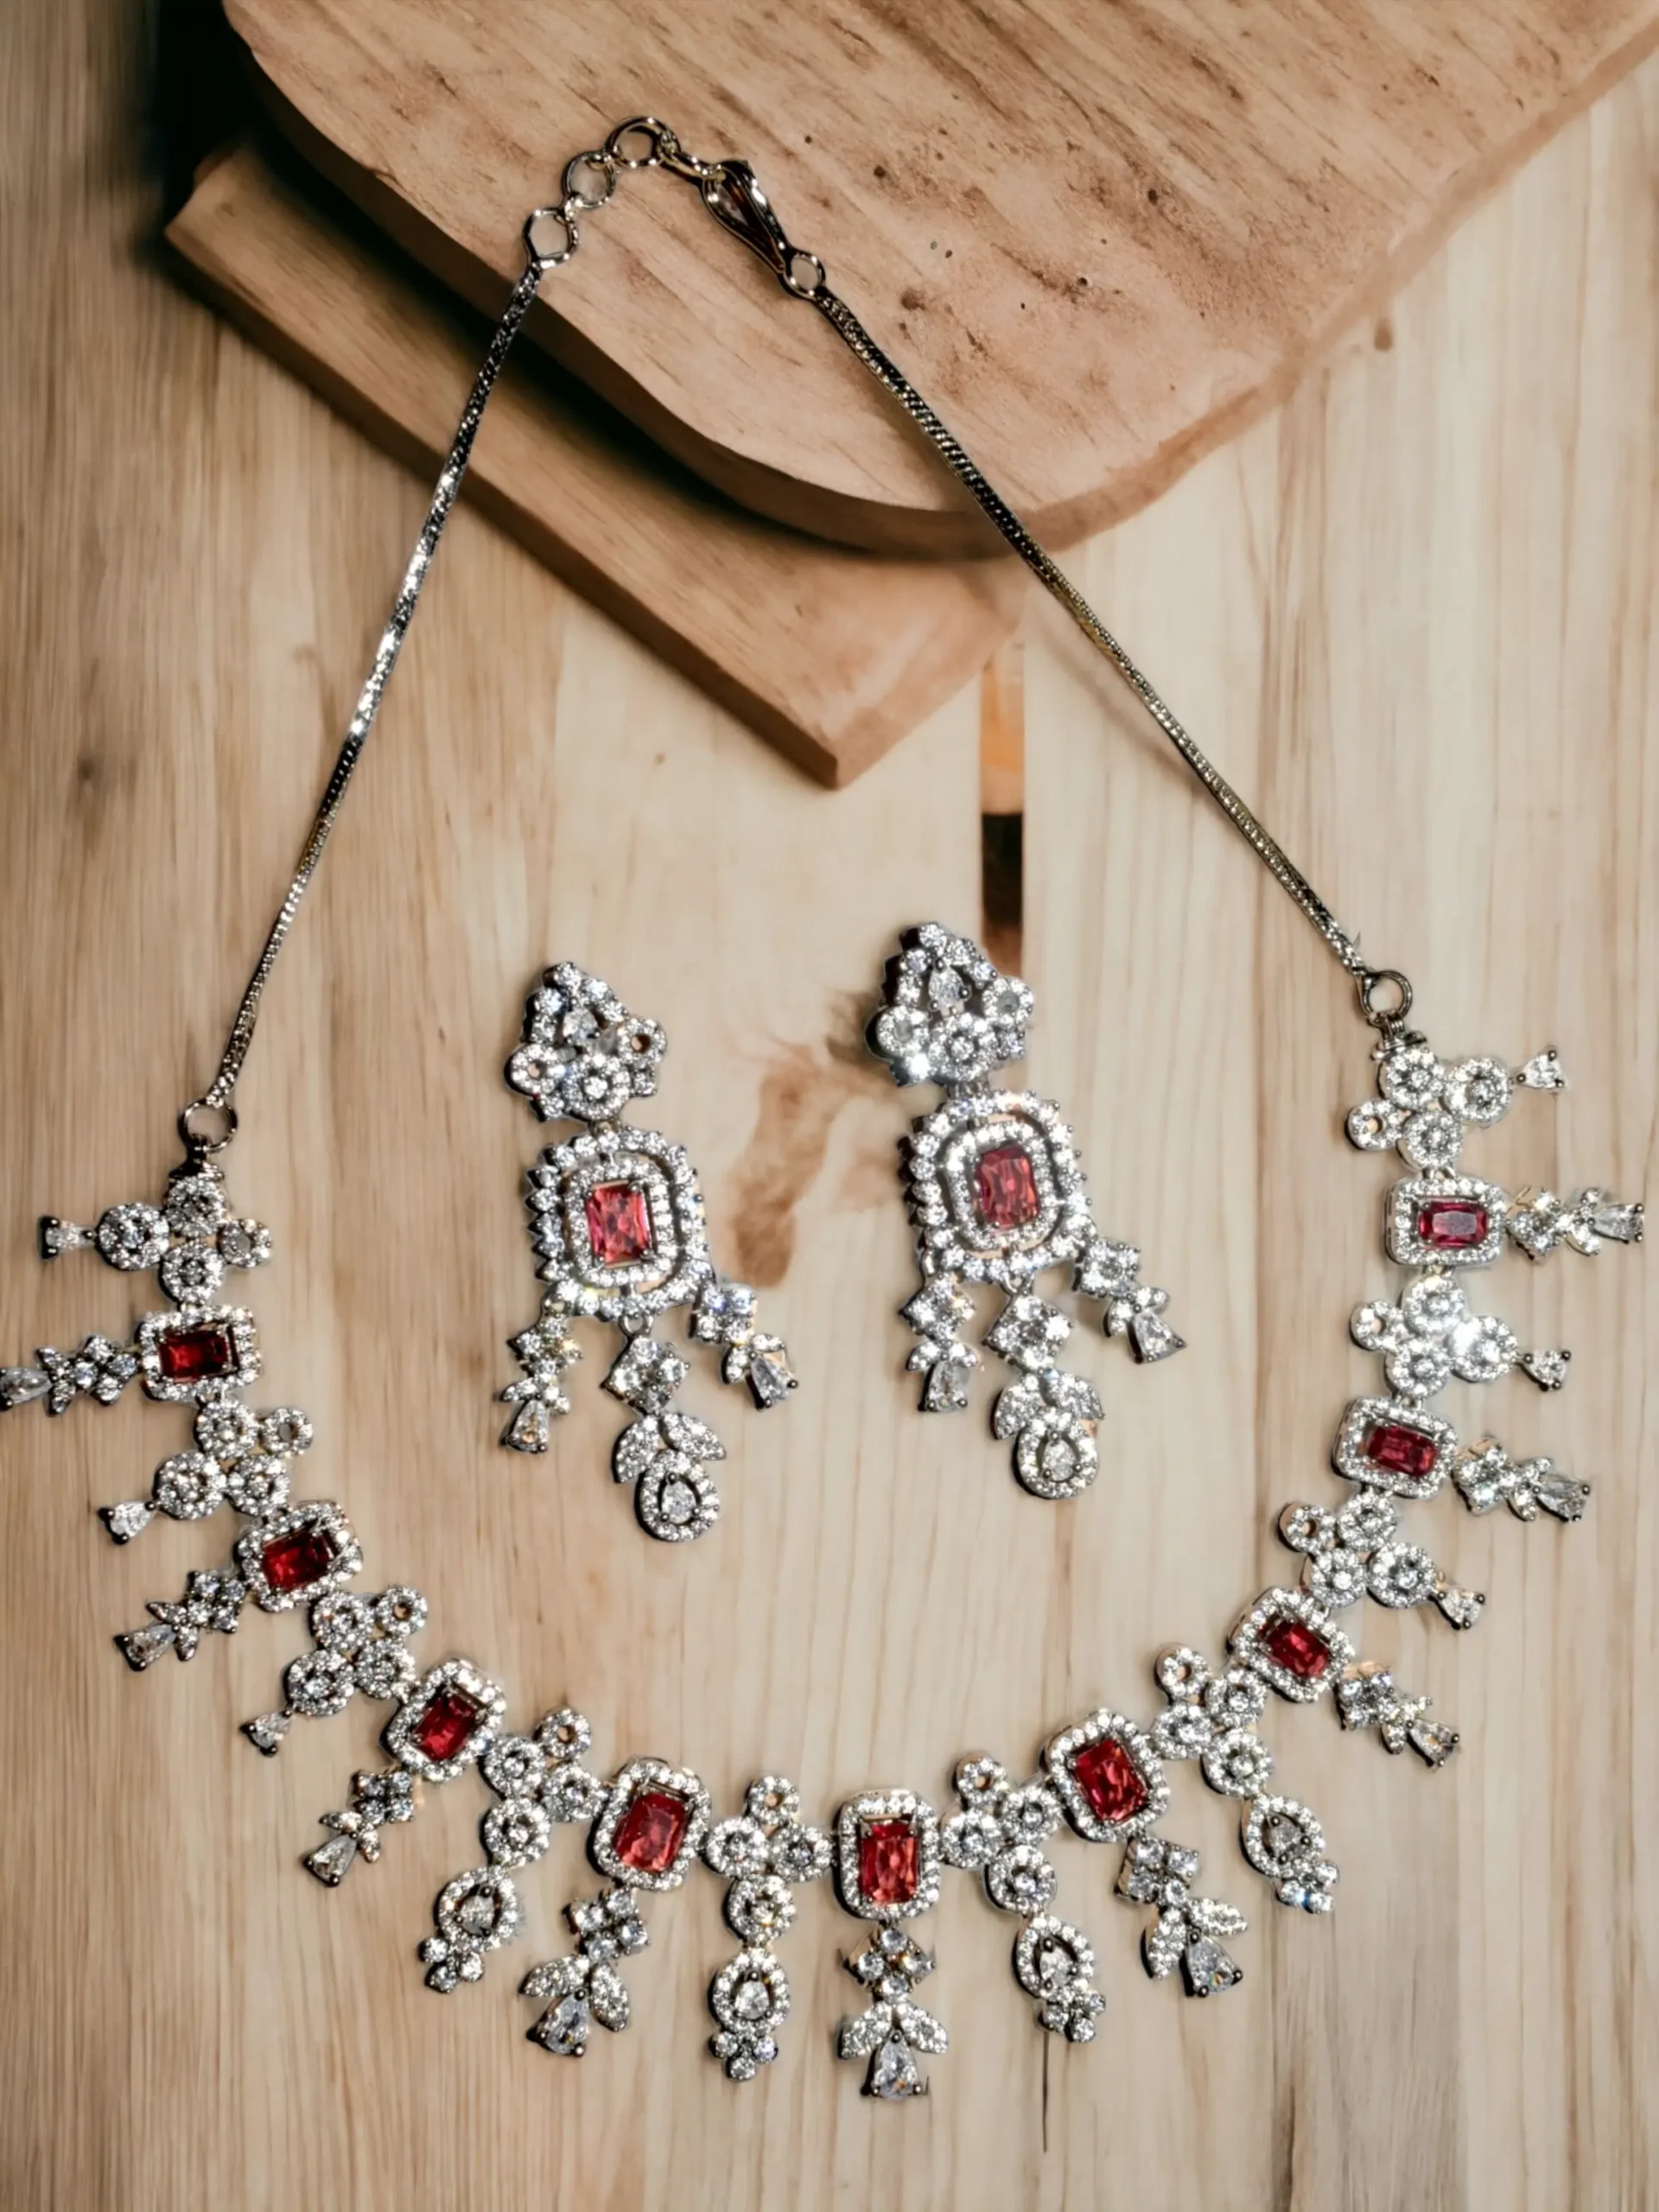 Fashionable AD Necklace Set at reasonable price - Trink Wink Jewels